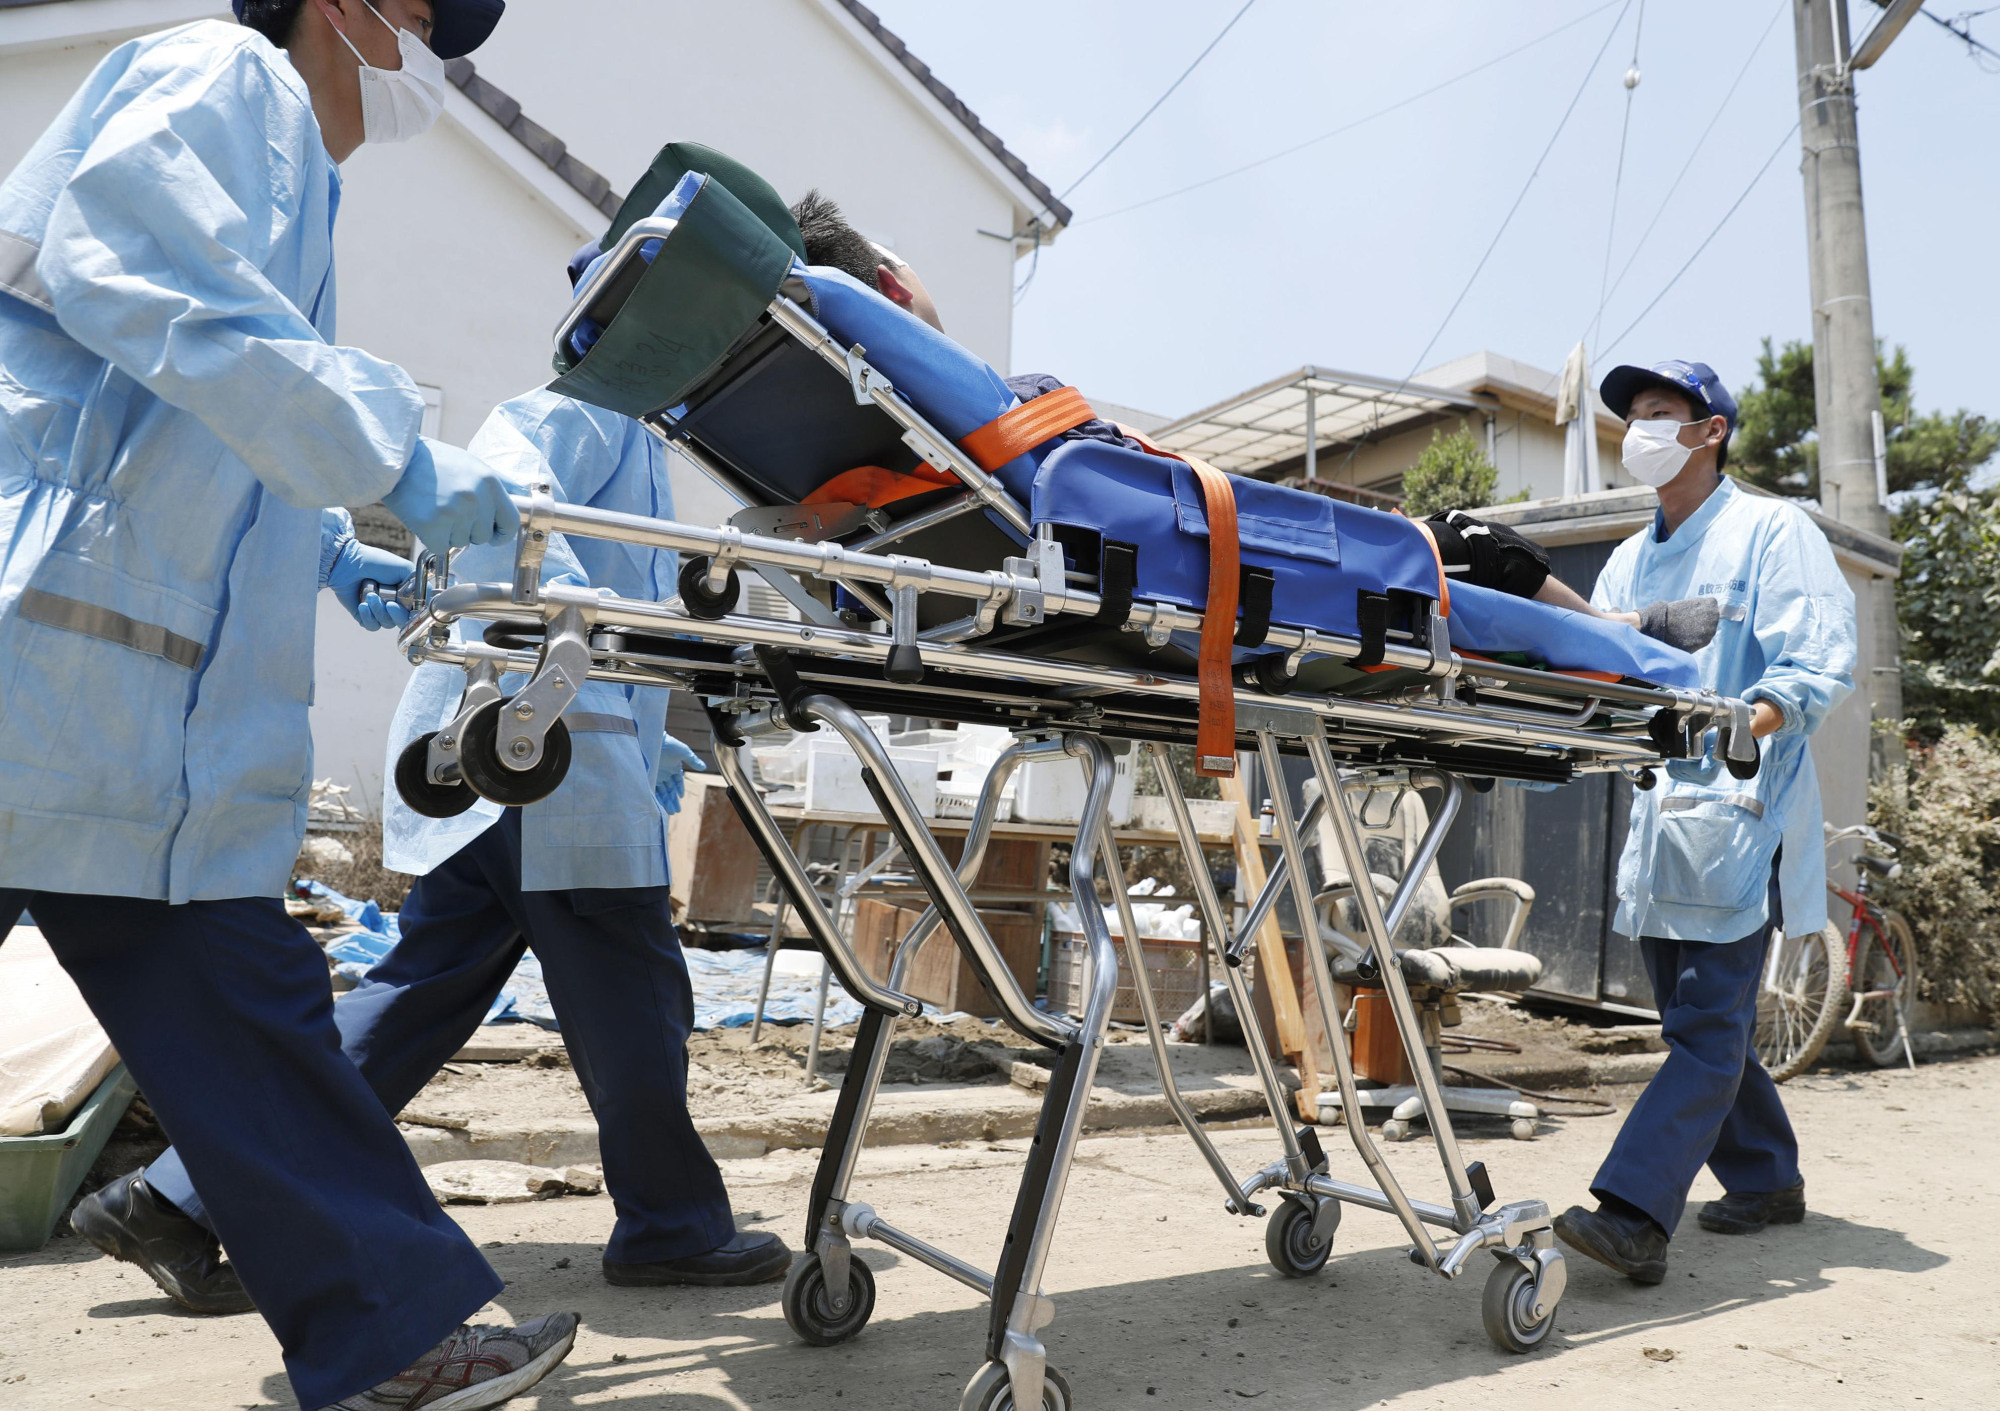 A person suspected of suffering from a heat-related illness is transported to an ambulance in Kurashiki, Okayama Prefecture, in July. | KYODO